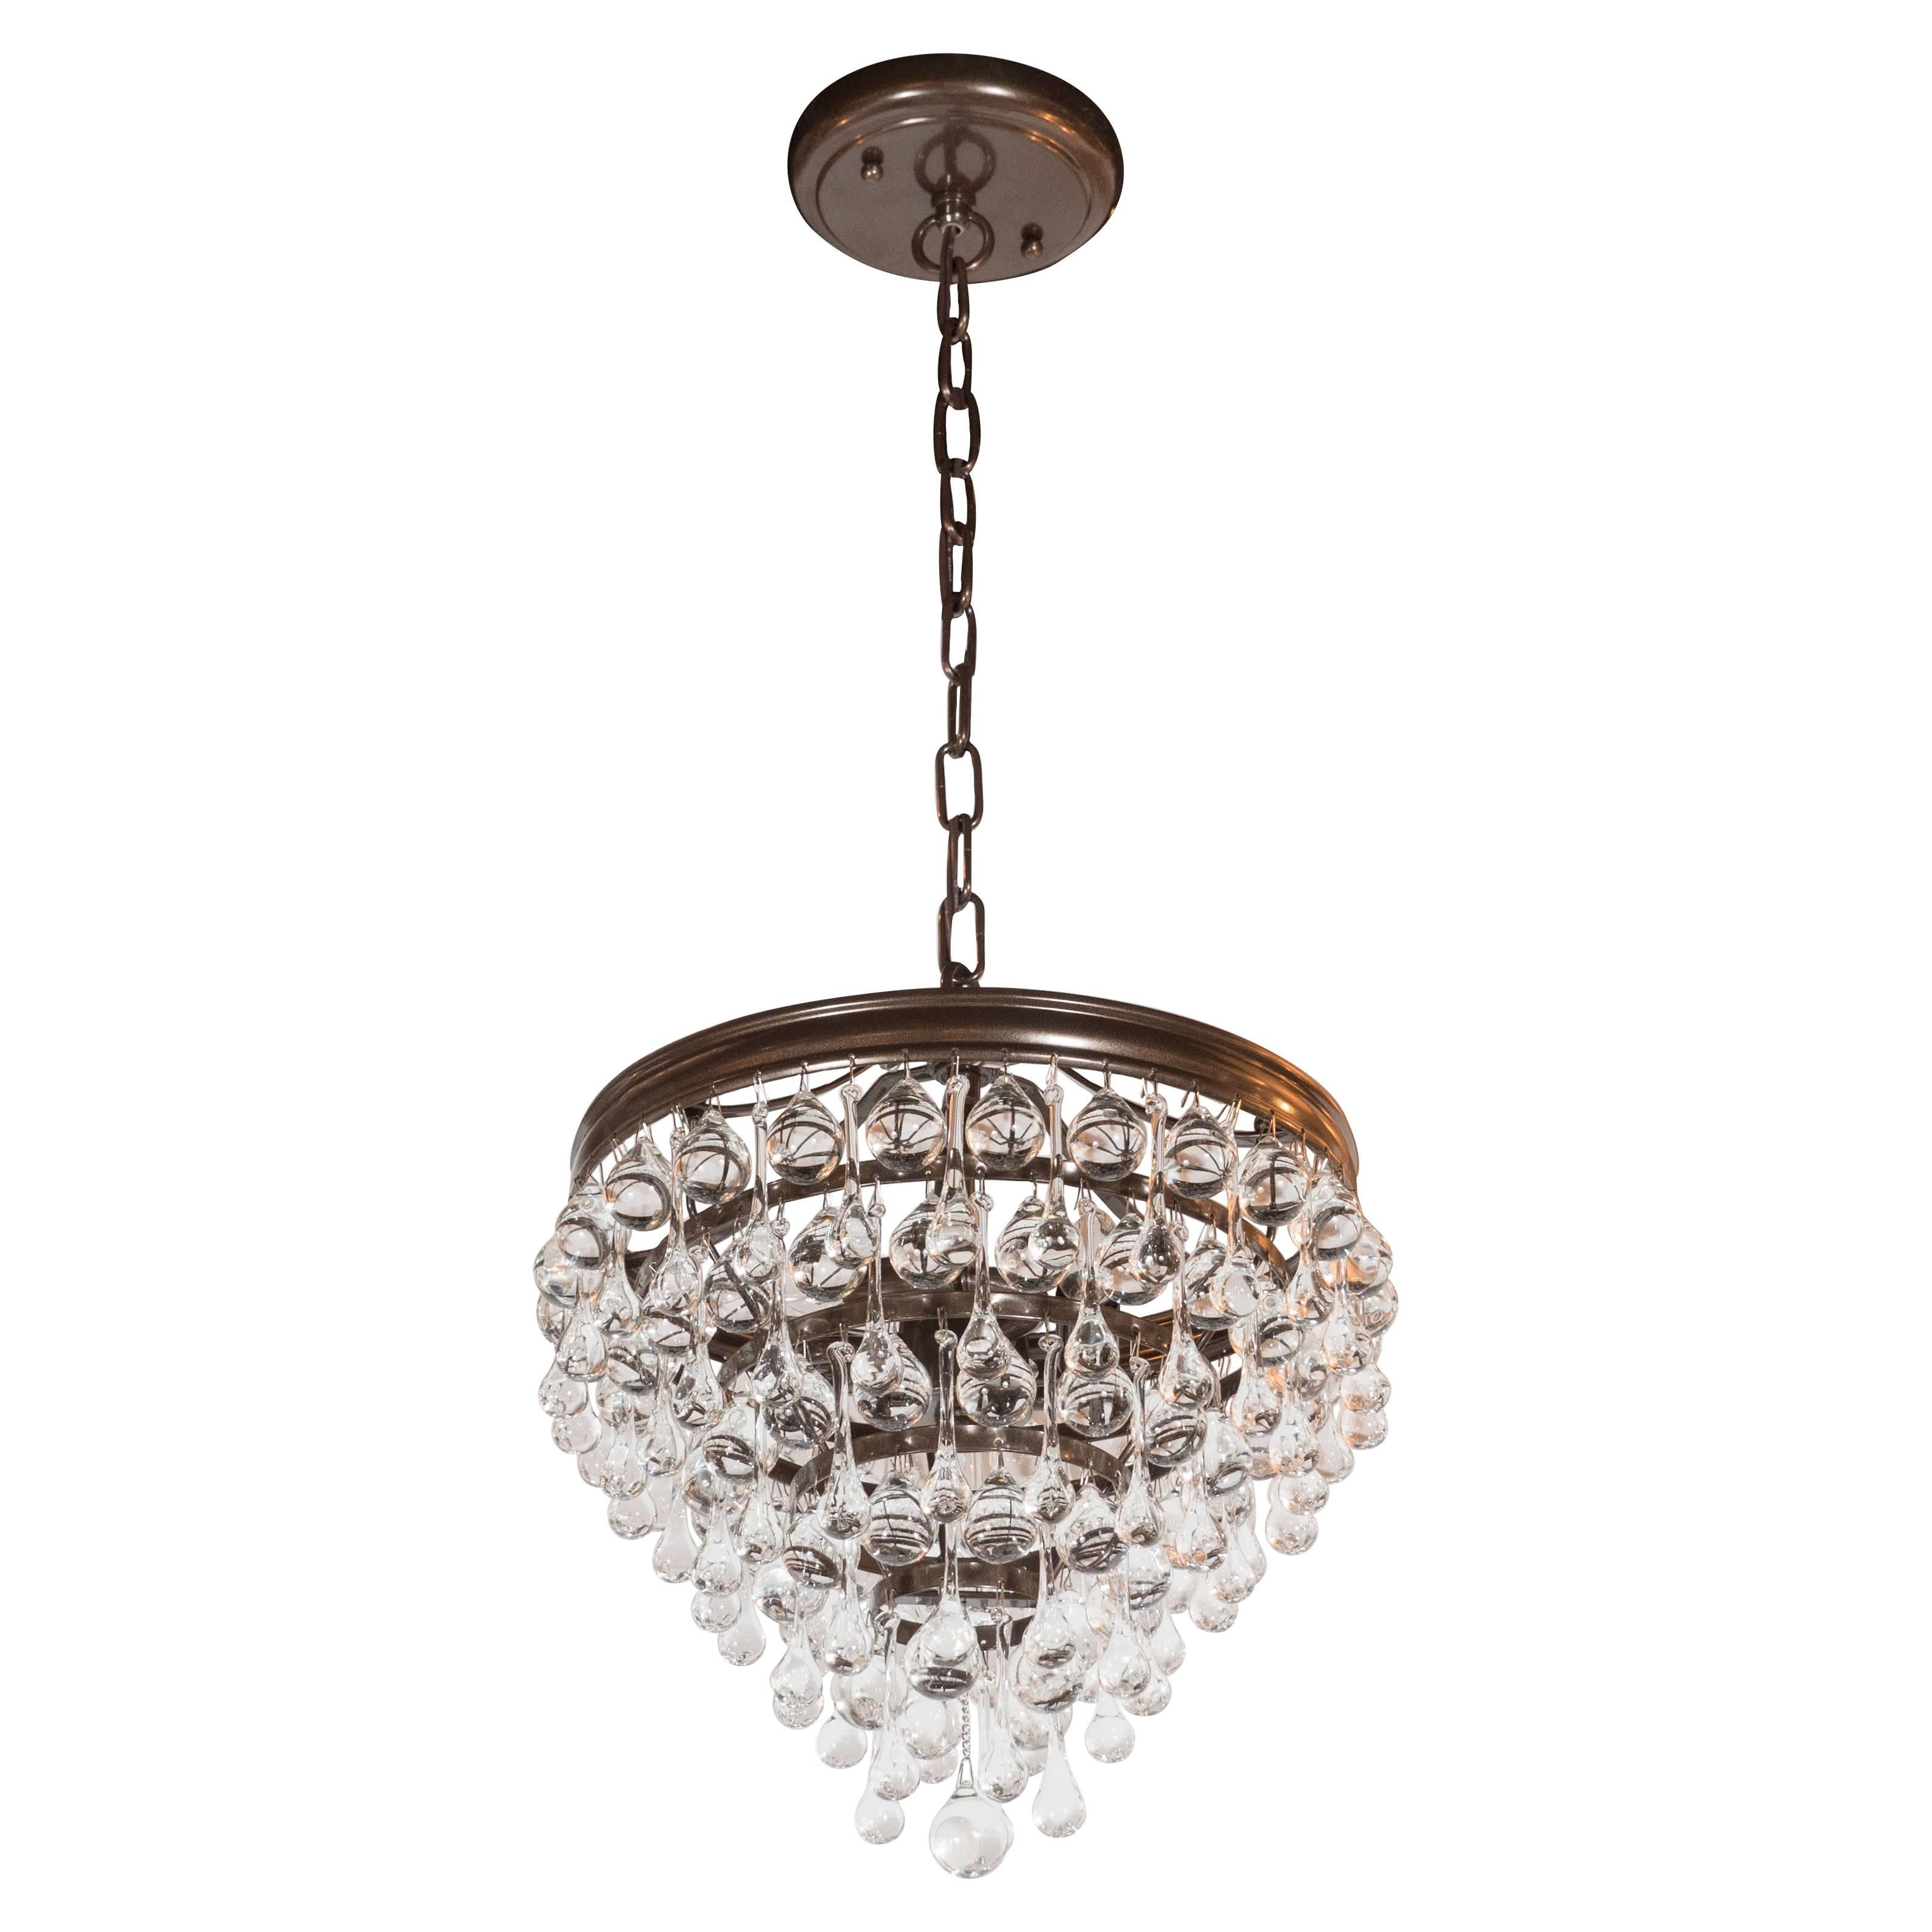 Hollywood Regency Crystal Teardrop and Ball Chandelier with Bronze Fittings